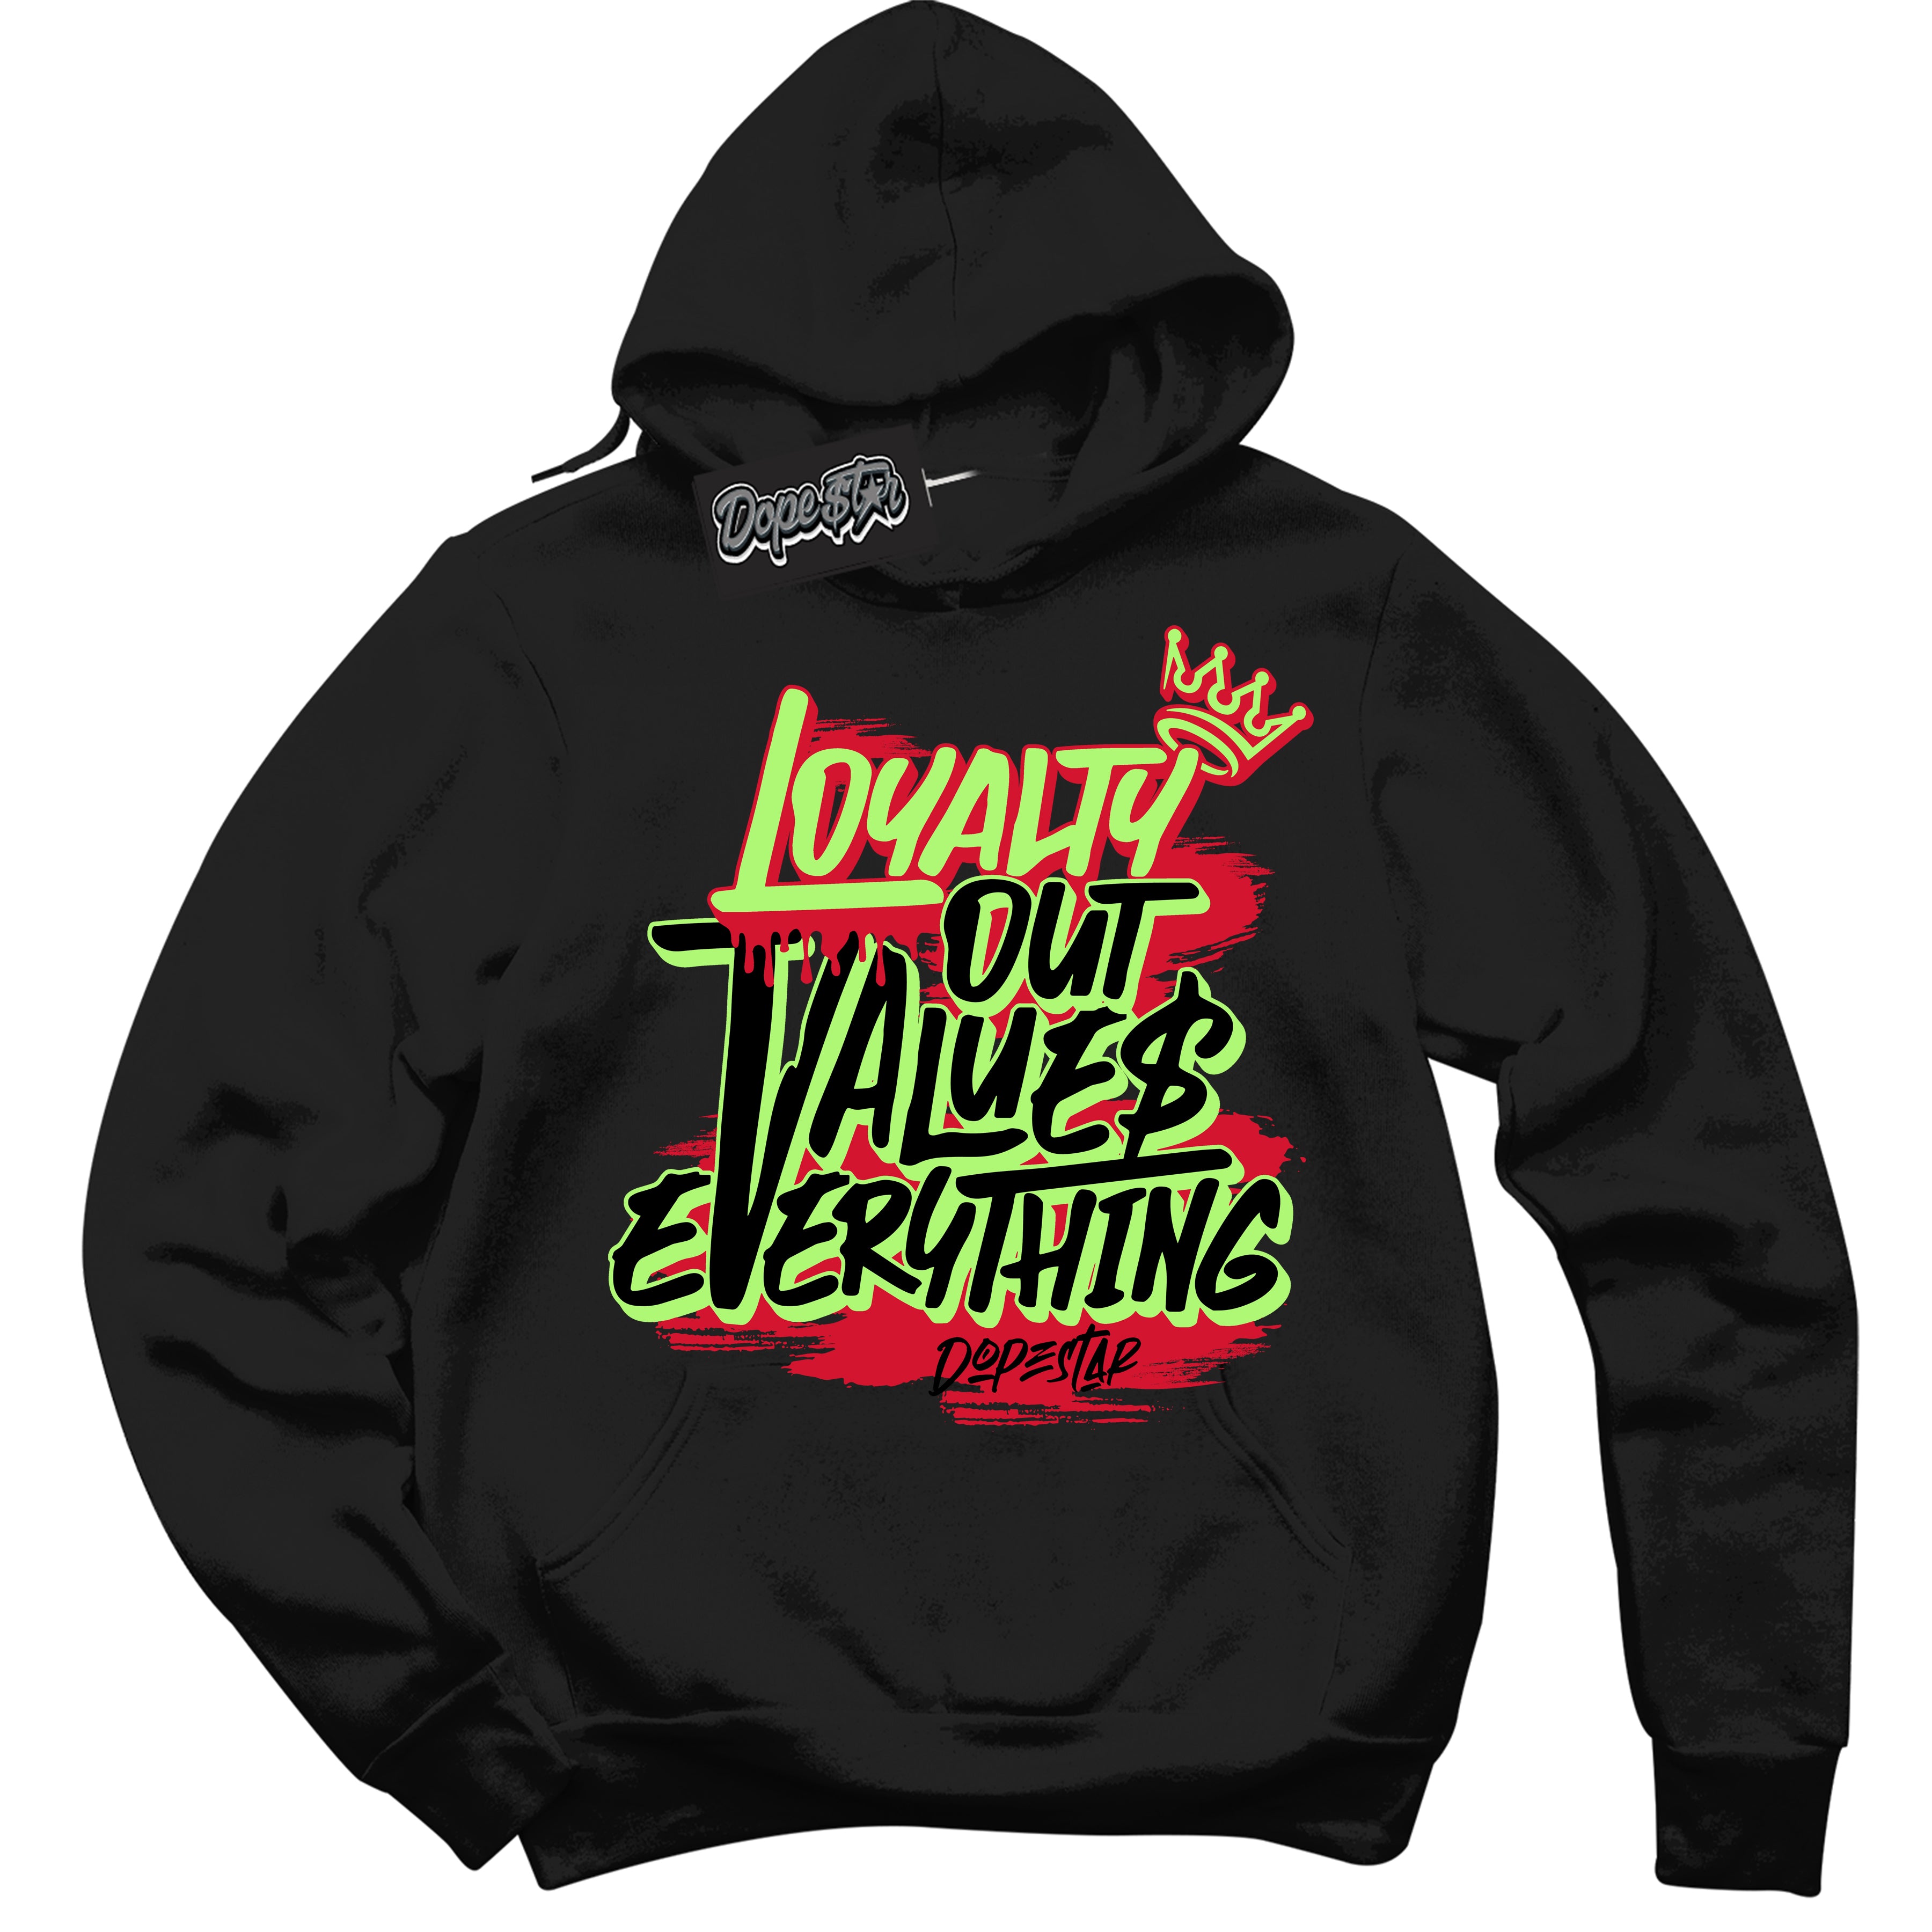 Cool Black Hoodie with “ Loyalty Out Values Everything ”  design that Perfectly Matches  Reverse Grinch 6s Sneakers.